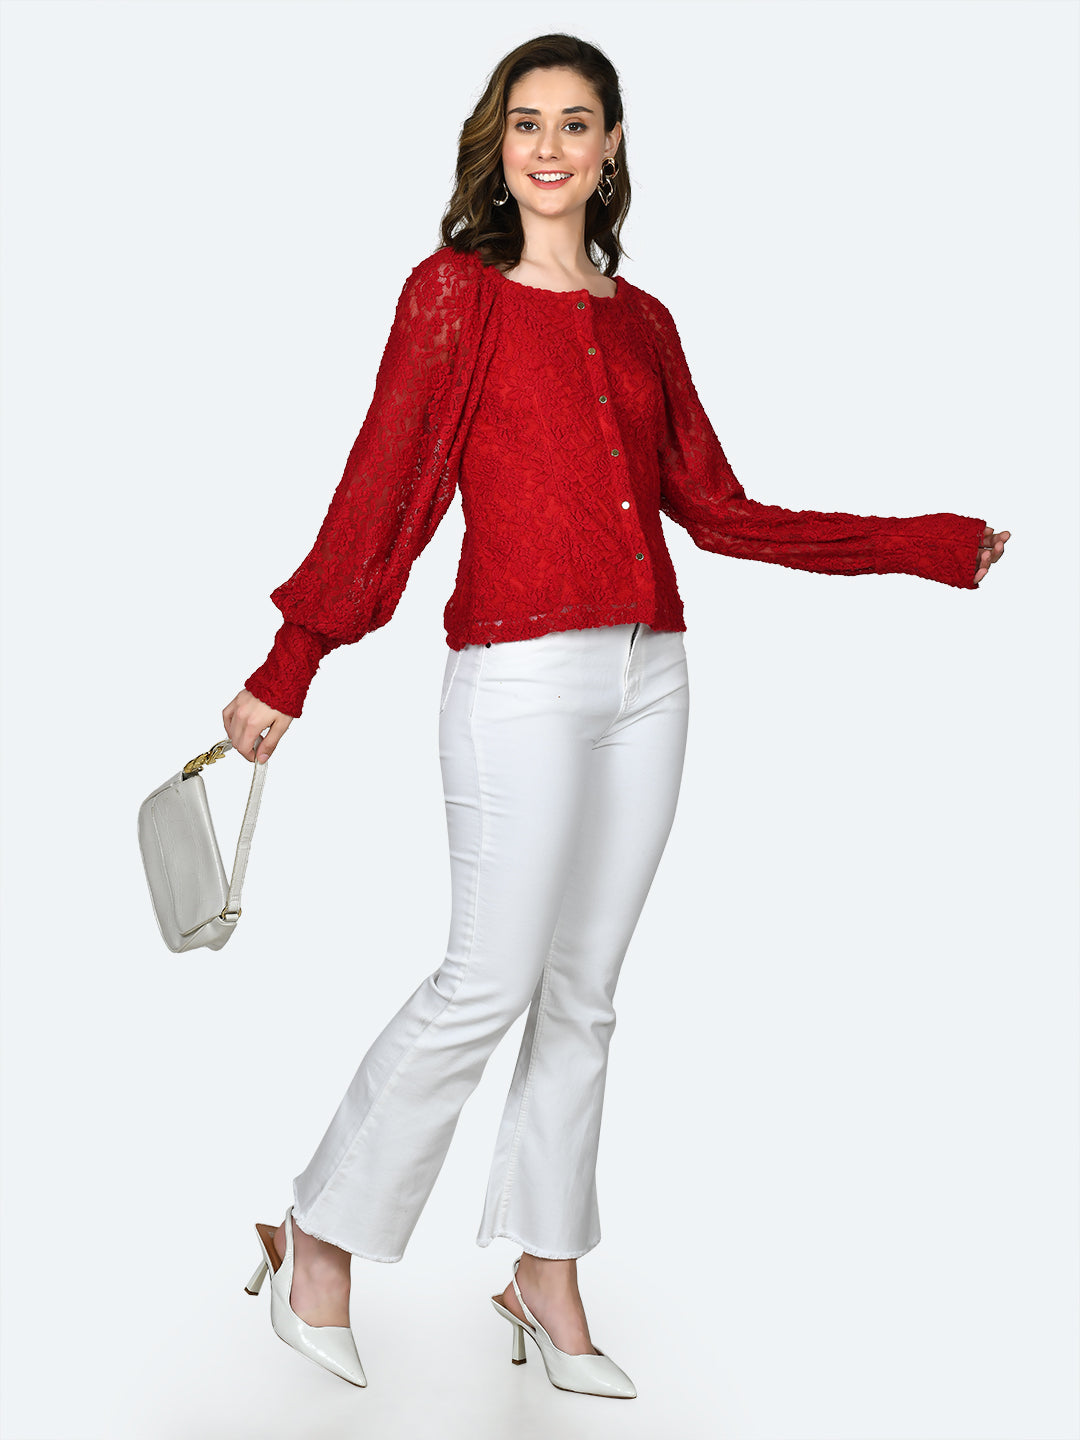 Red Lace Buttoned Top For Women